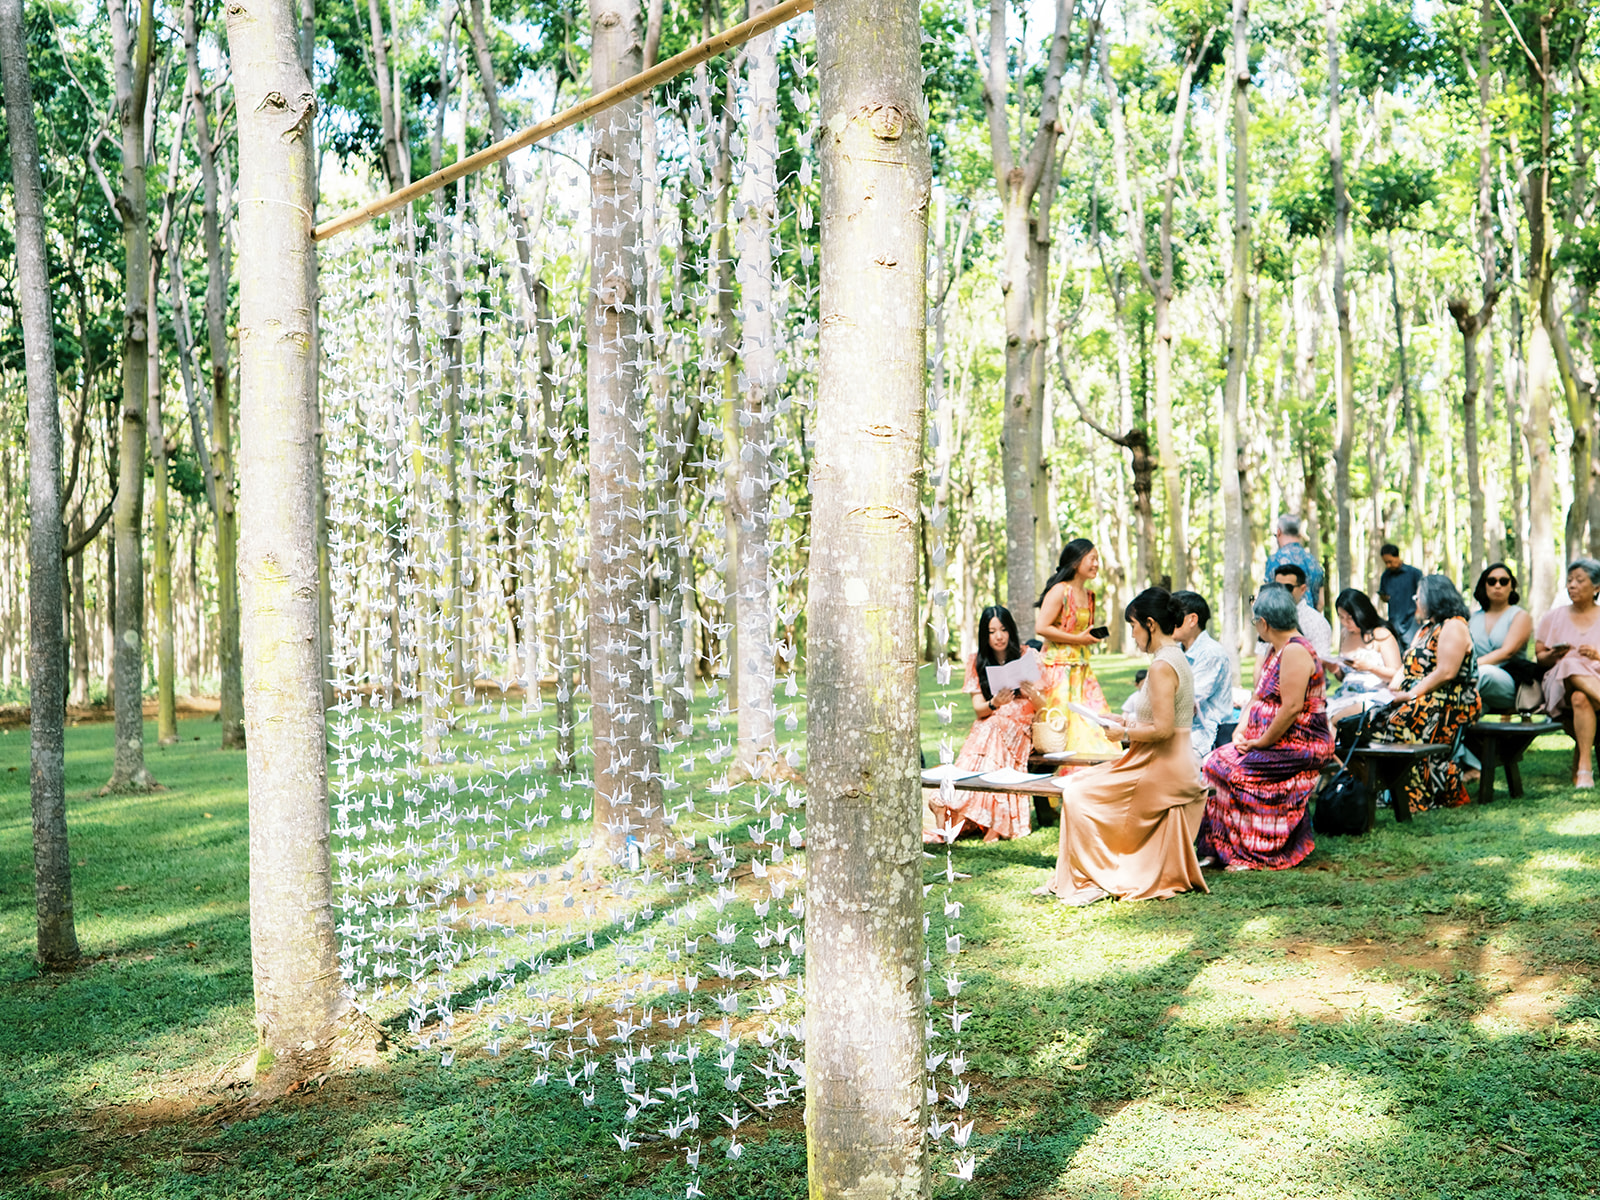 Outdoor gathering with people seated near a decorative hanging installation among trees Wedding at Na Aina Kai